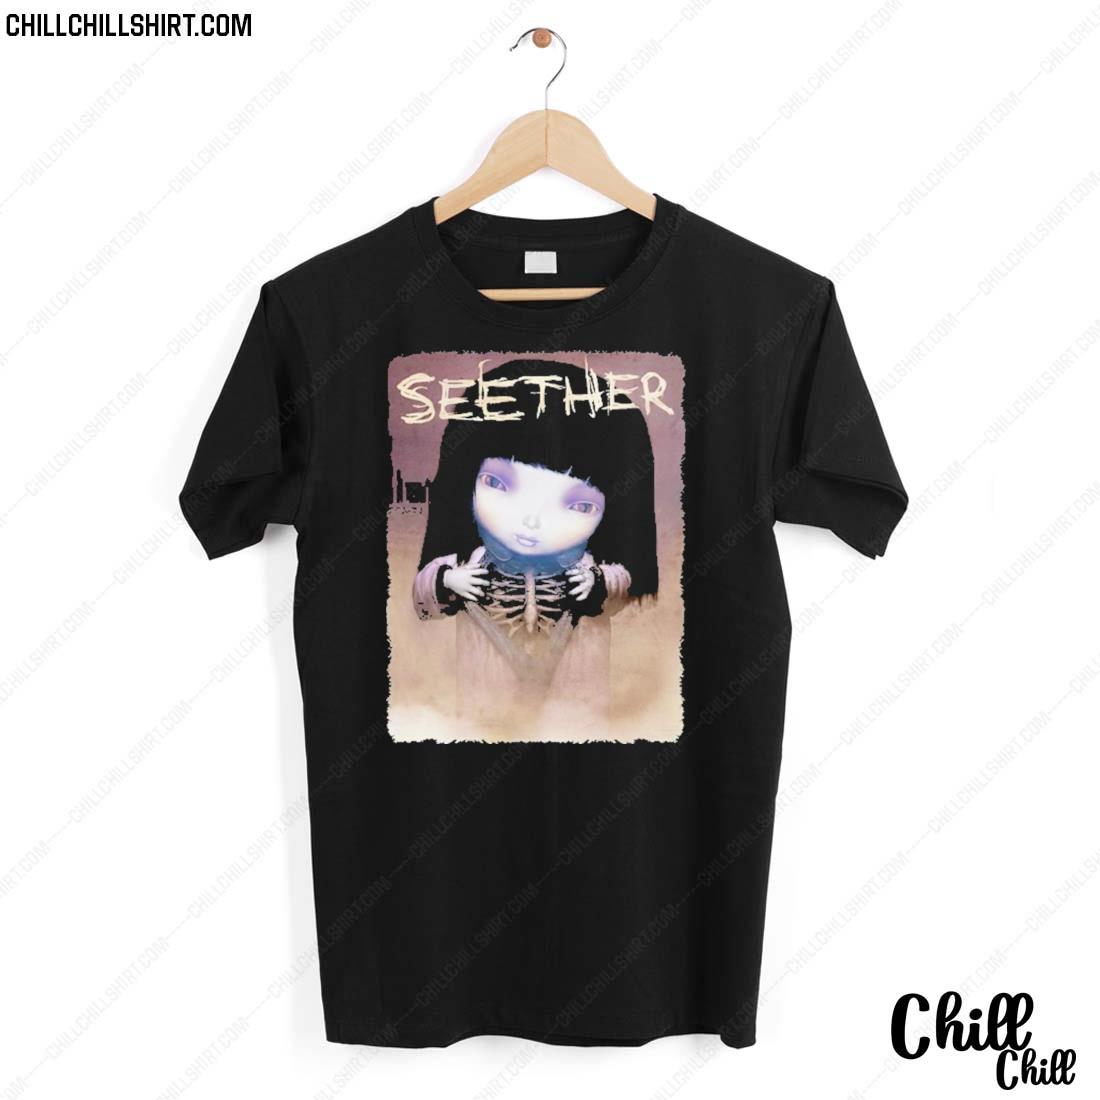 Nice finding Beauty In Negative Spaces Band Seether T-shirt